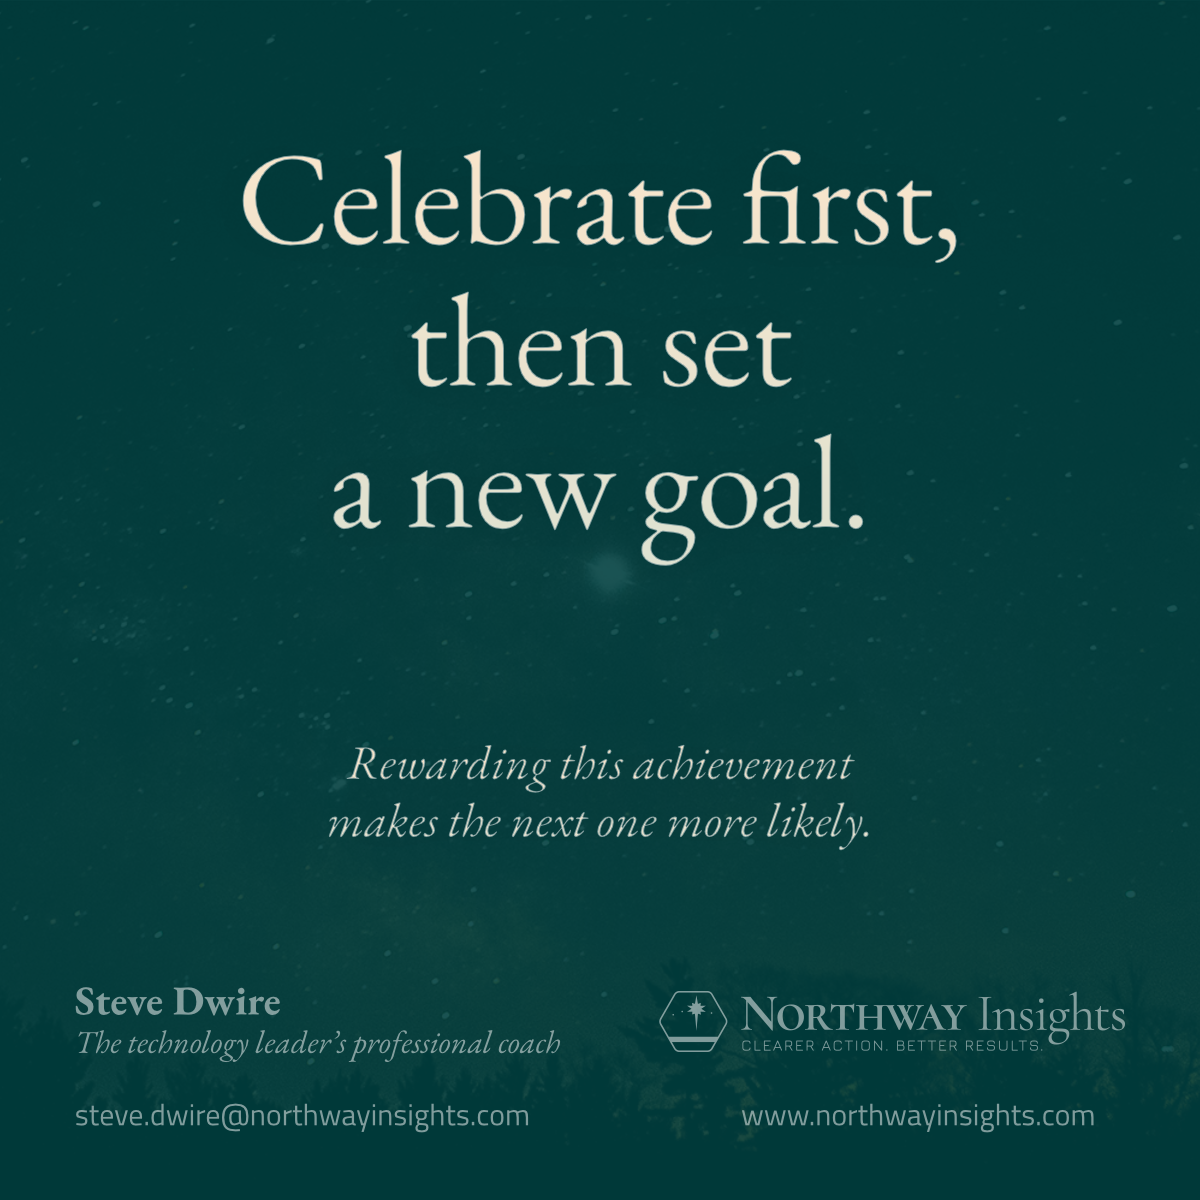 Celebrate first, then set a new goal. (Rewarding this achievement makes the next one more likely.)